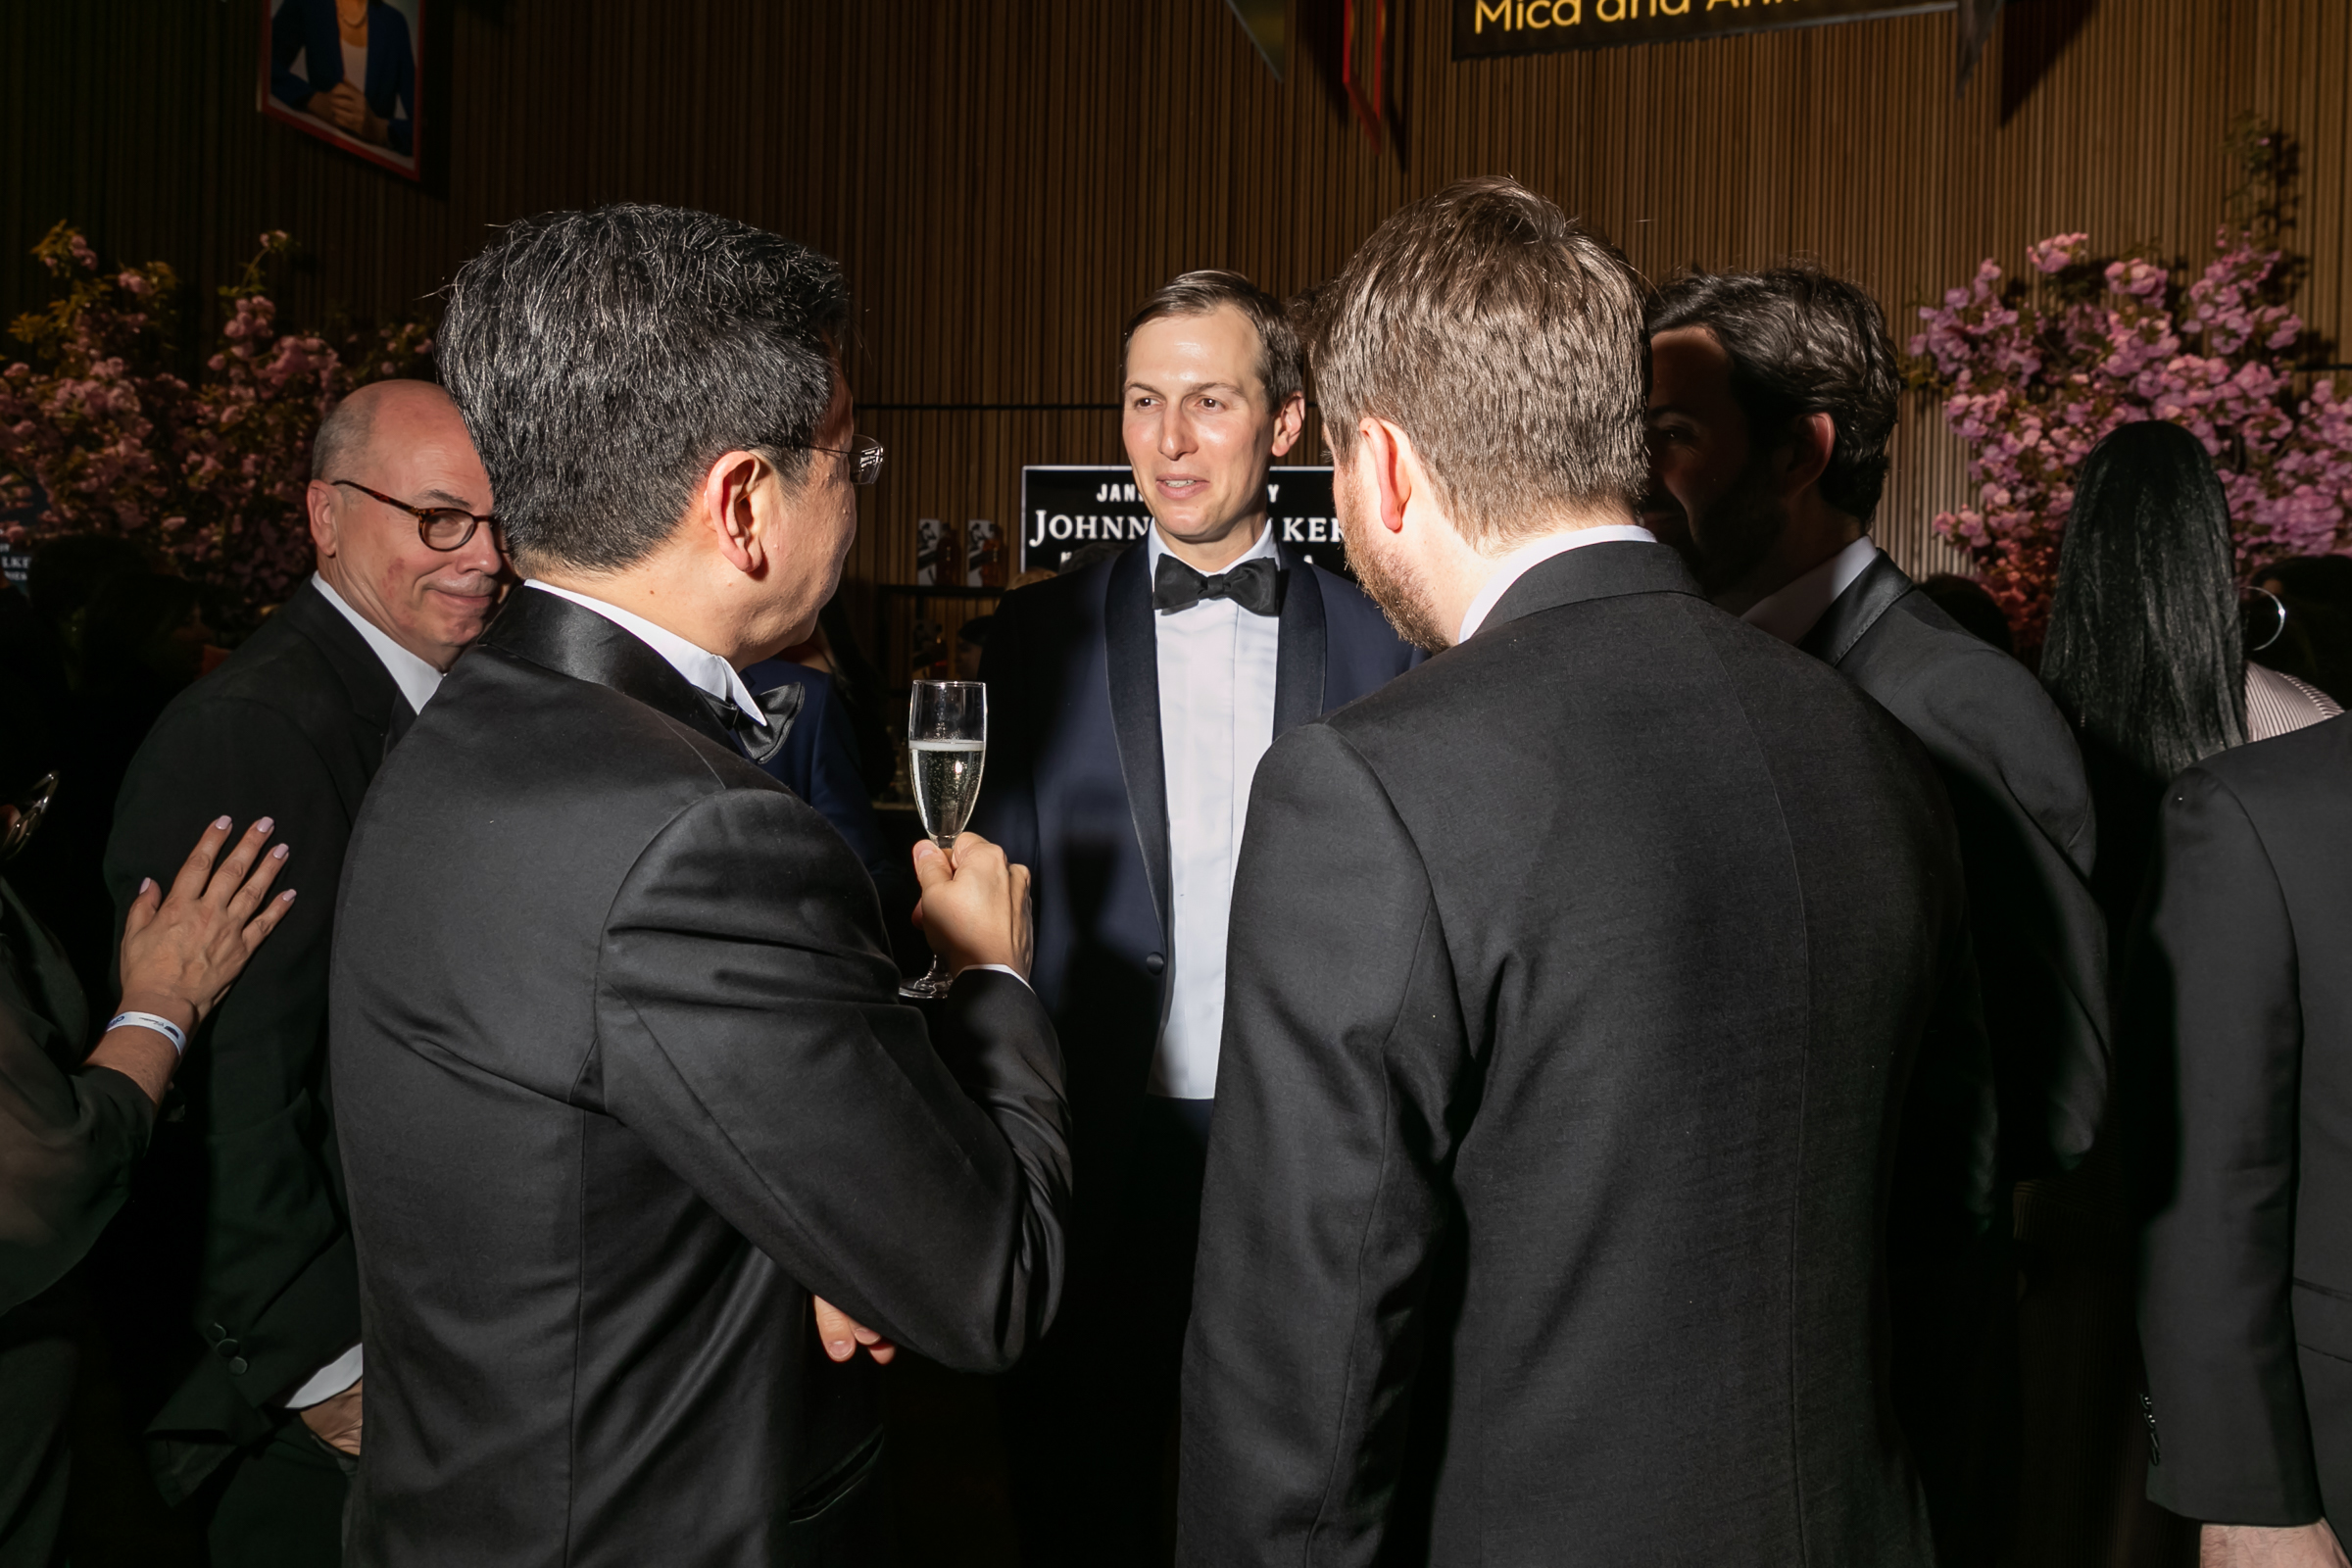 Jared Kushner at the Time 100 Gala at Jazz at Lincoln Center in New York City on April 23, 2019. (Kevin Tachman for TIME)